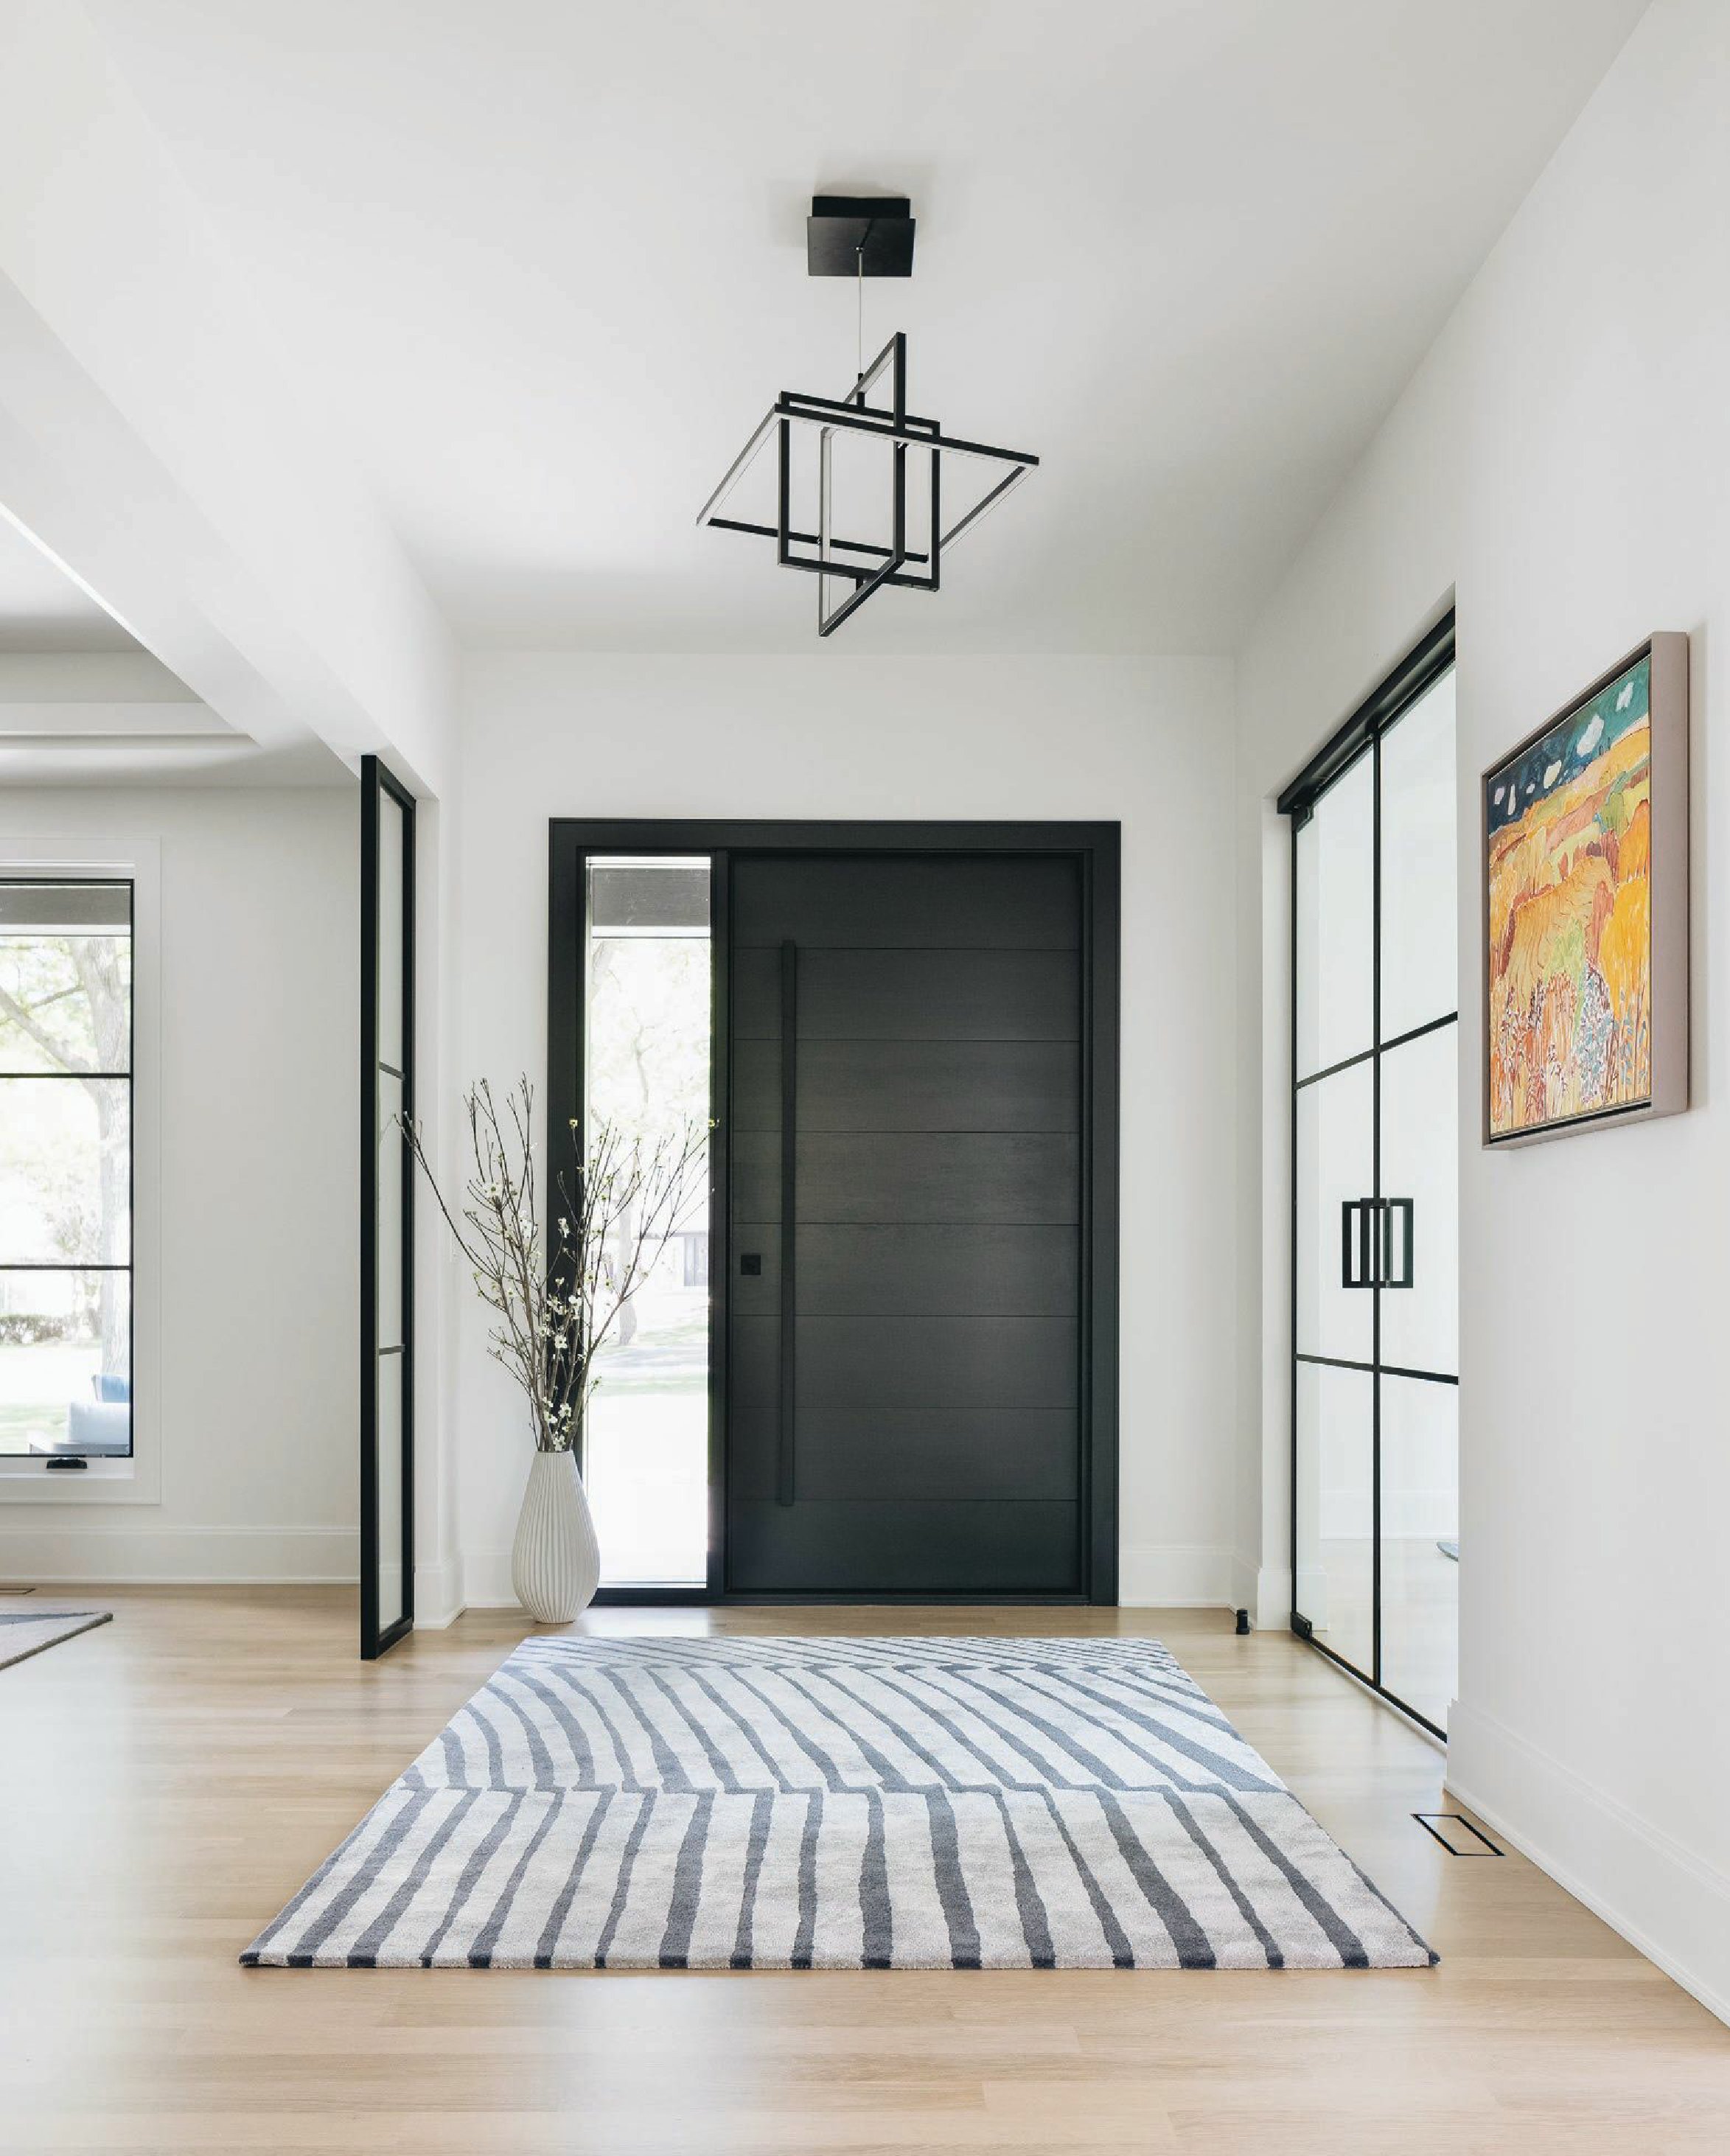 Highlights of the home’s entry include a Davis & Davis rug and Kuzco light fixture. Photographed by Stoffer Photography Interiors